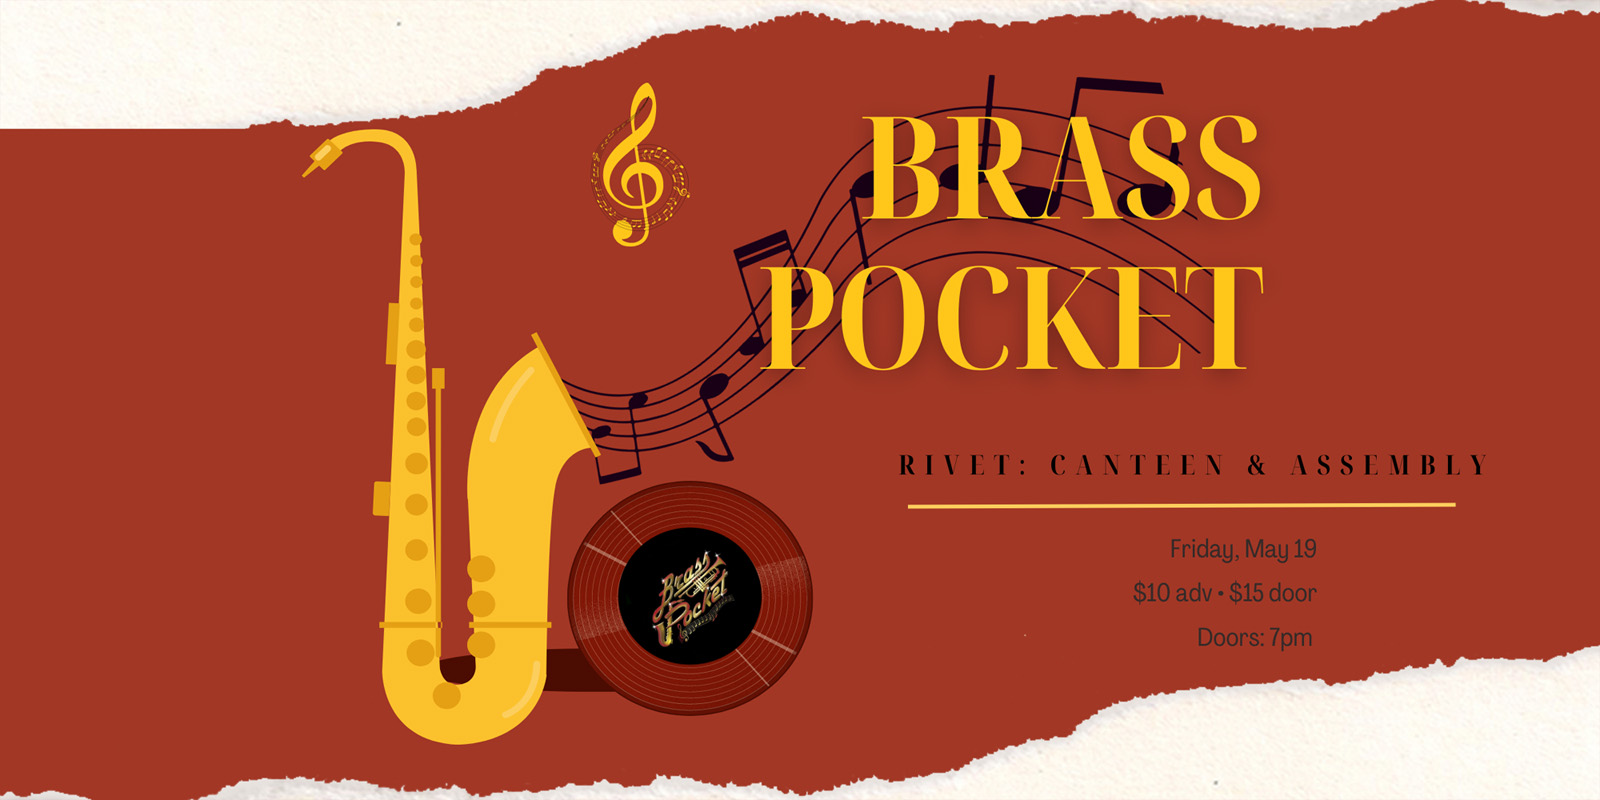 Join us for the Rivet: Canteen & Assembly return of Brass Pocket on Friday, May 19th, 2023!